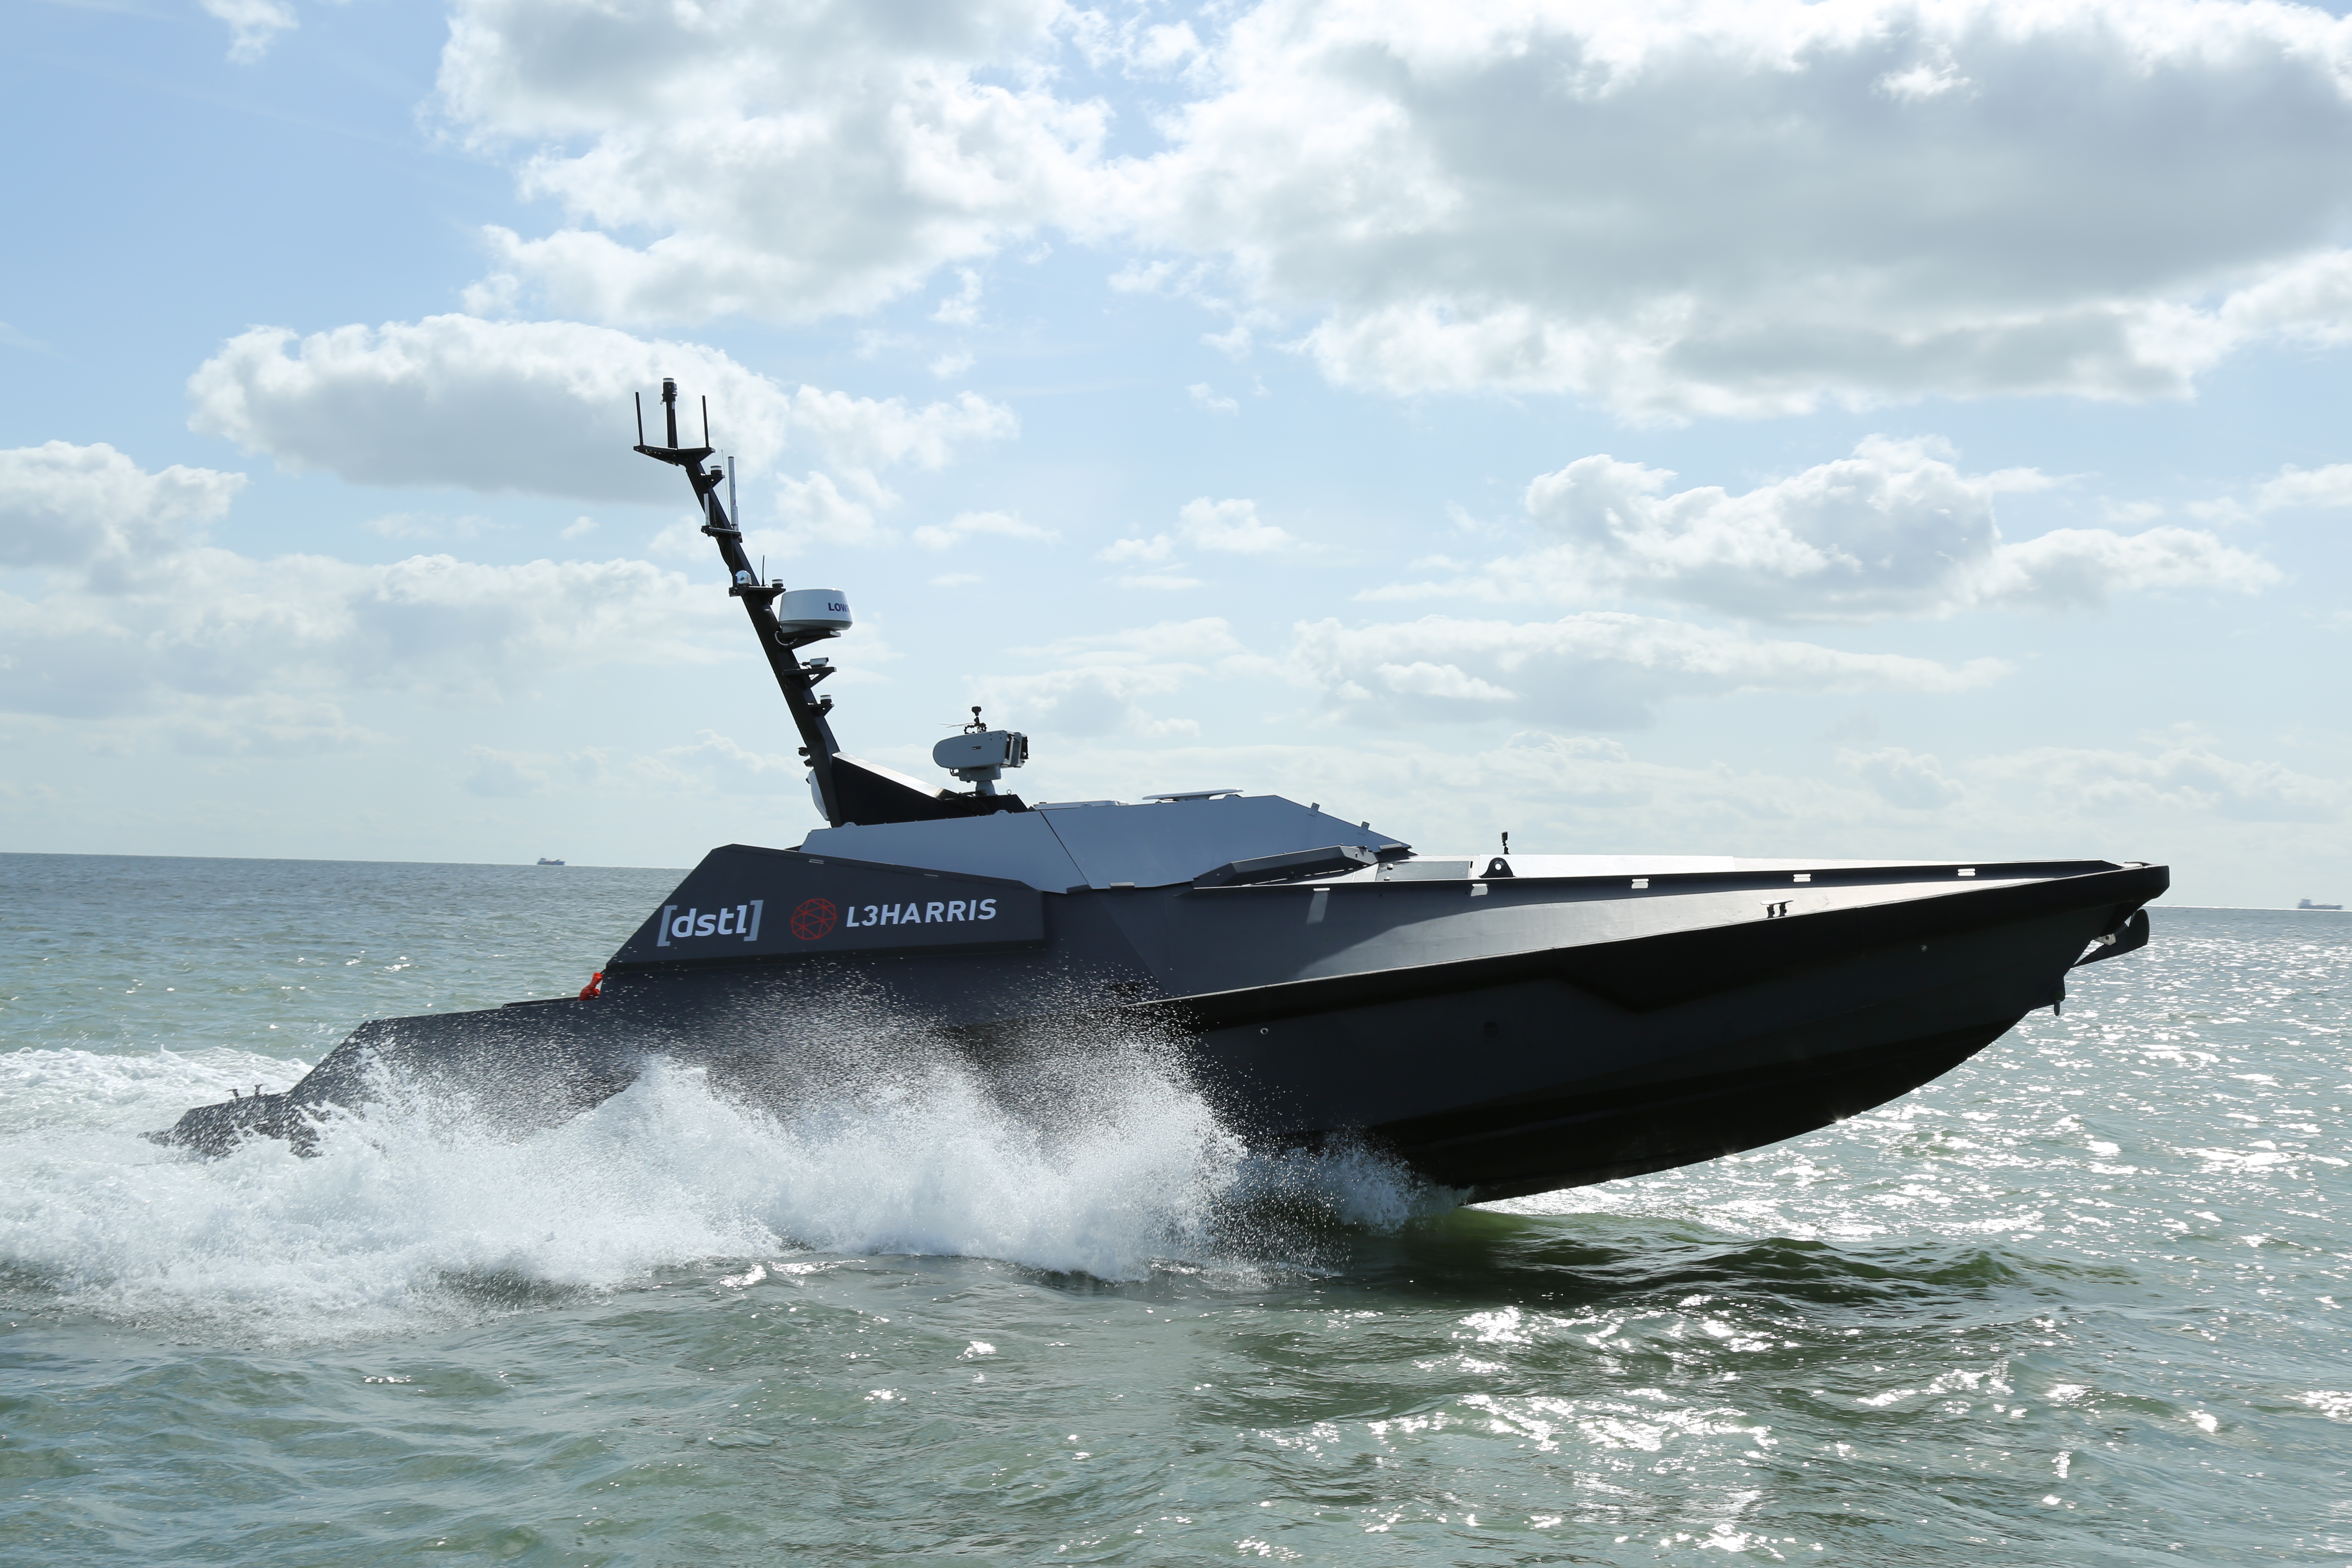 Stackley Combined L3Harris Technology Will Compete to Build New Navy